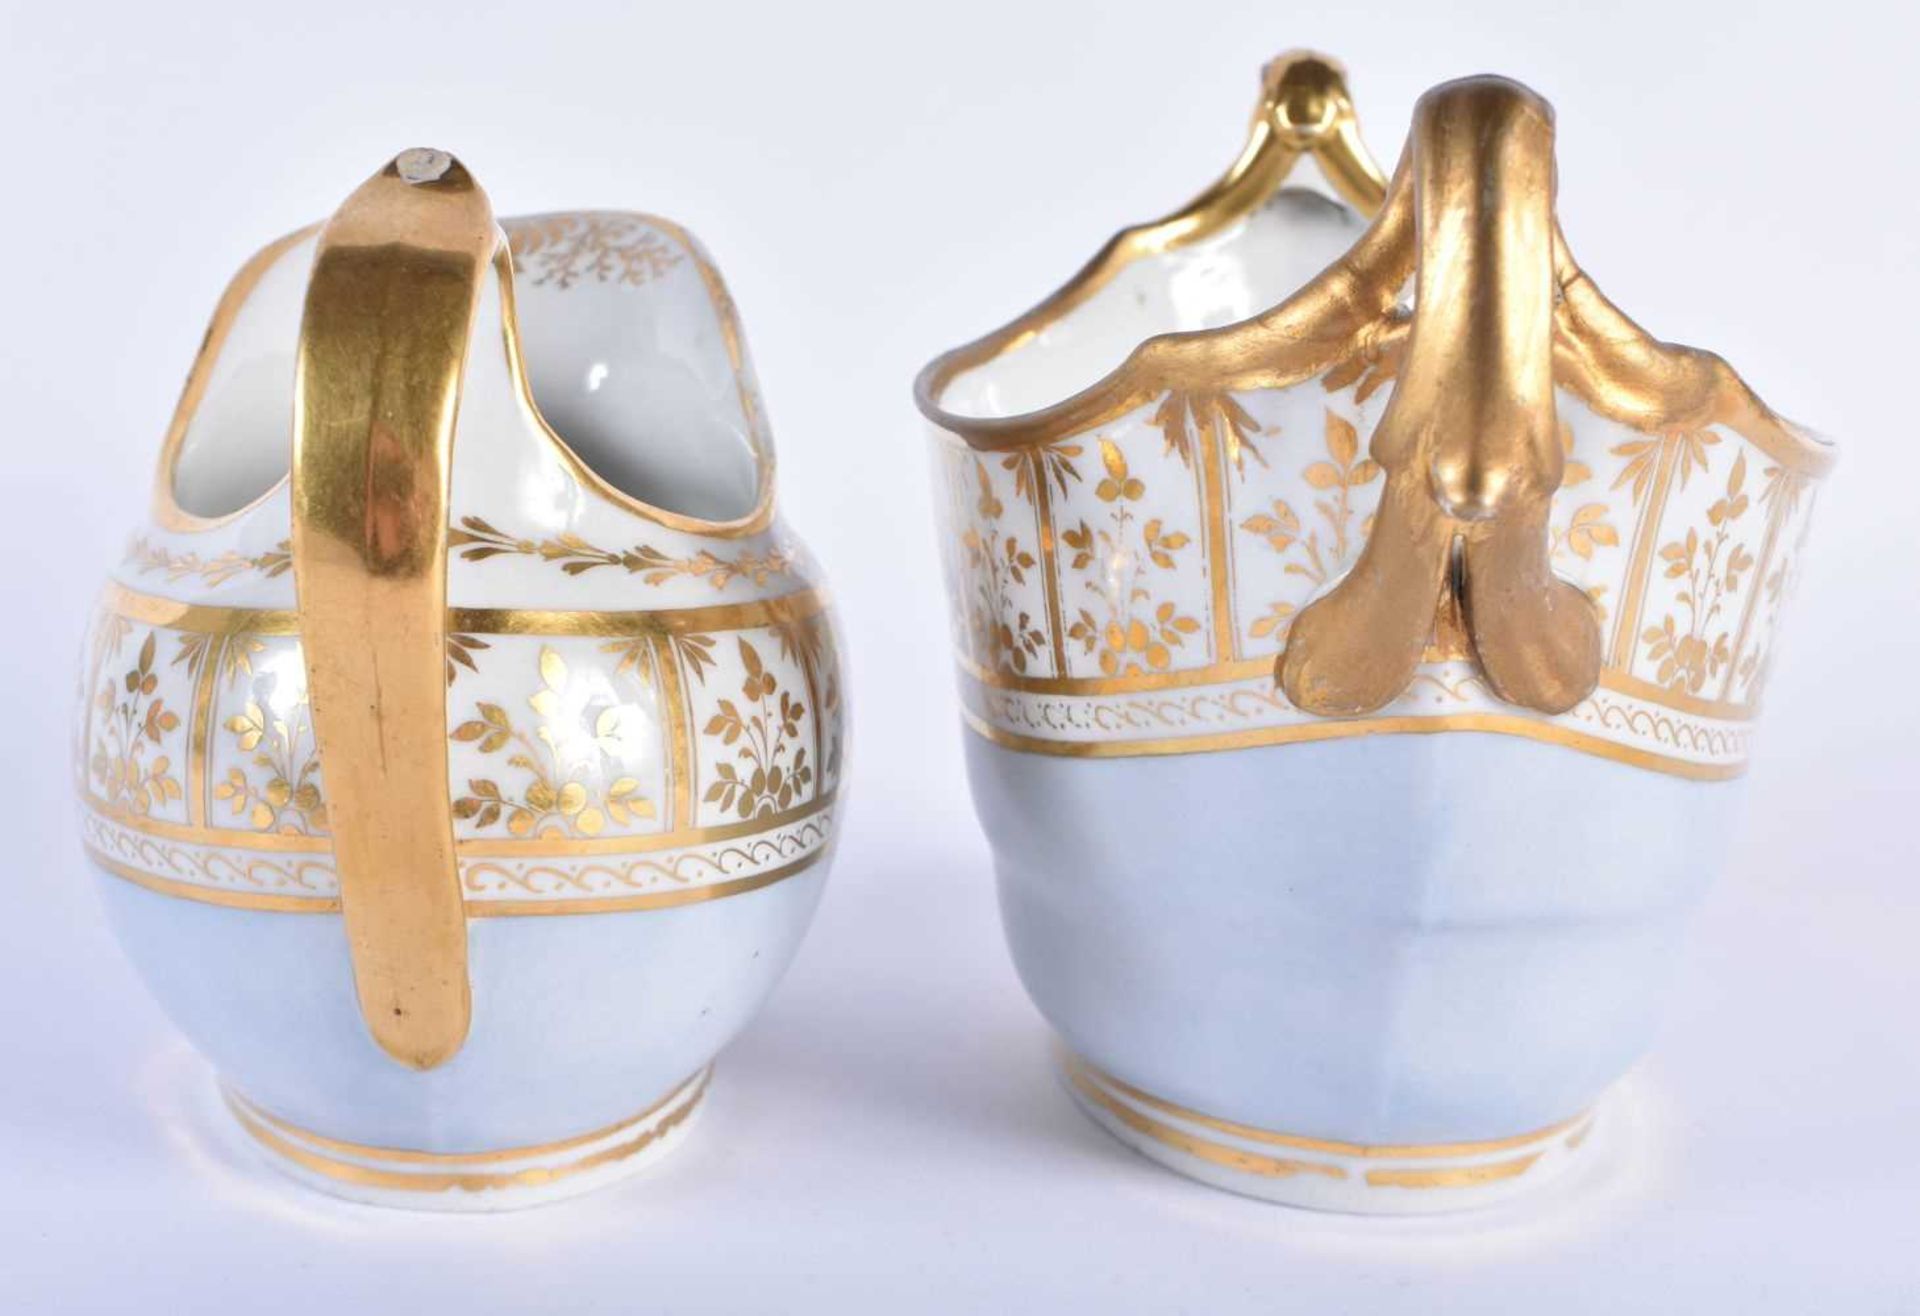 A LATE 18TH CENTURY GROUP OF BARR FLIGHT AND BARR PORCELAIN WARES painted with armorials on a - Image 9 of 31